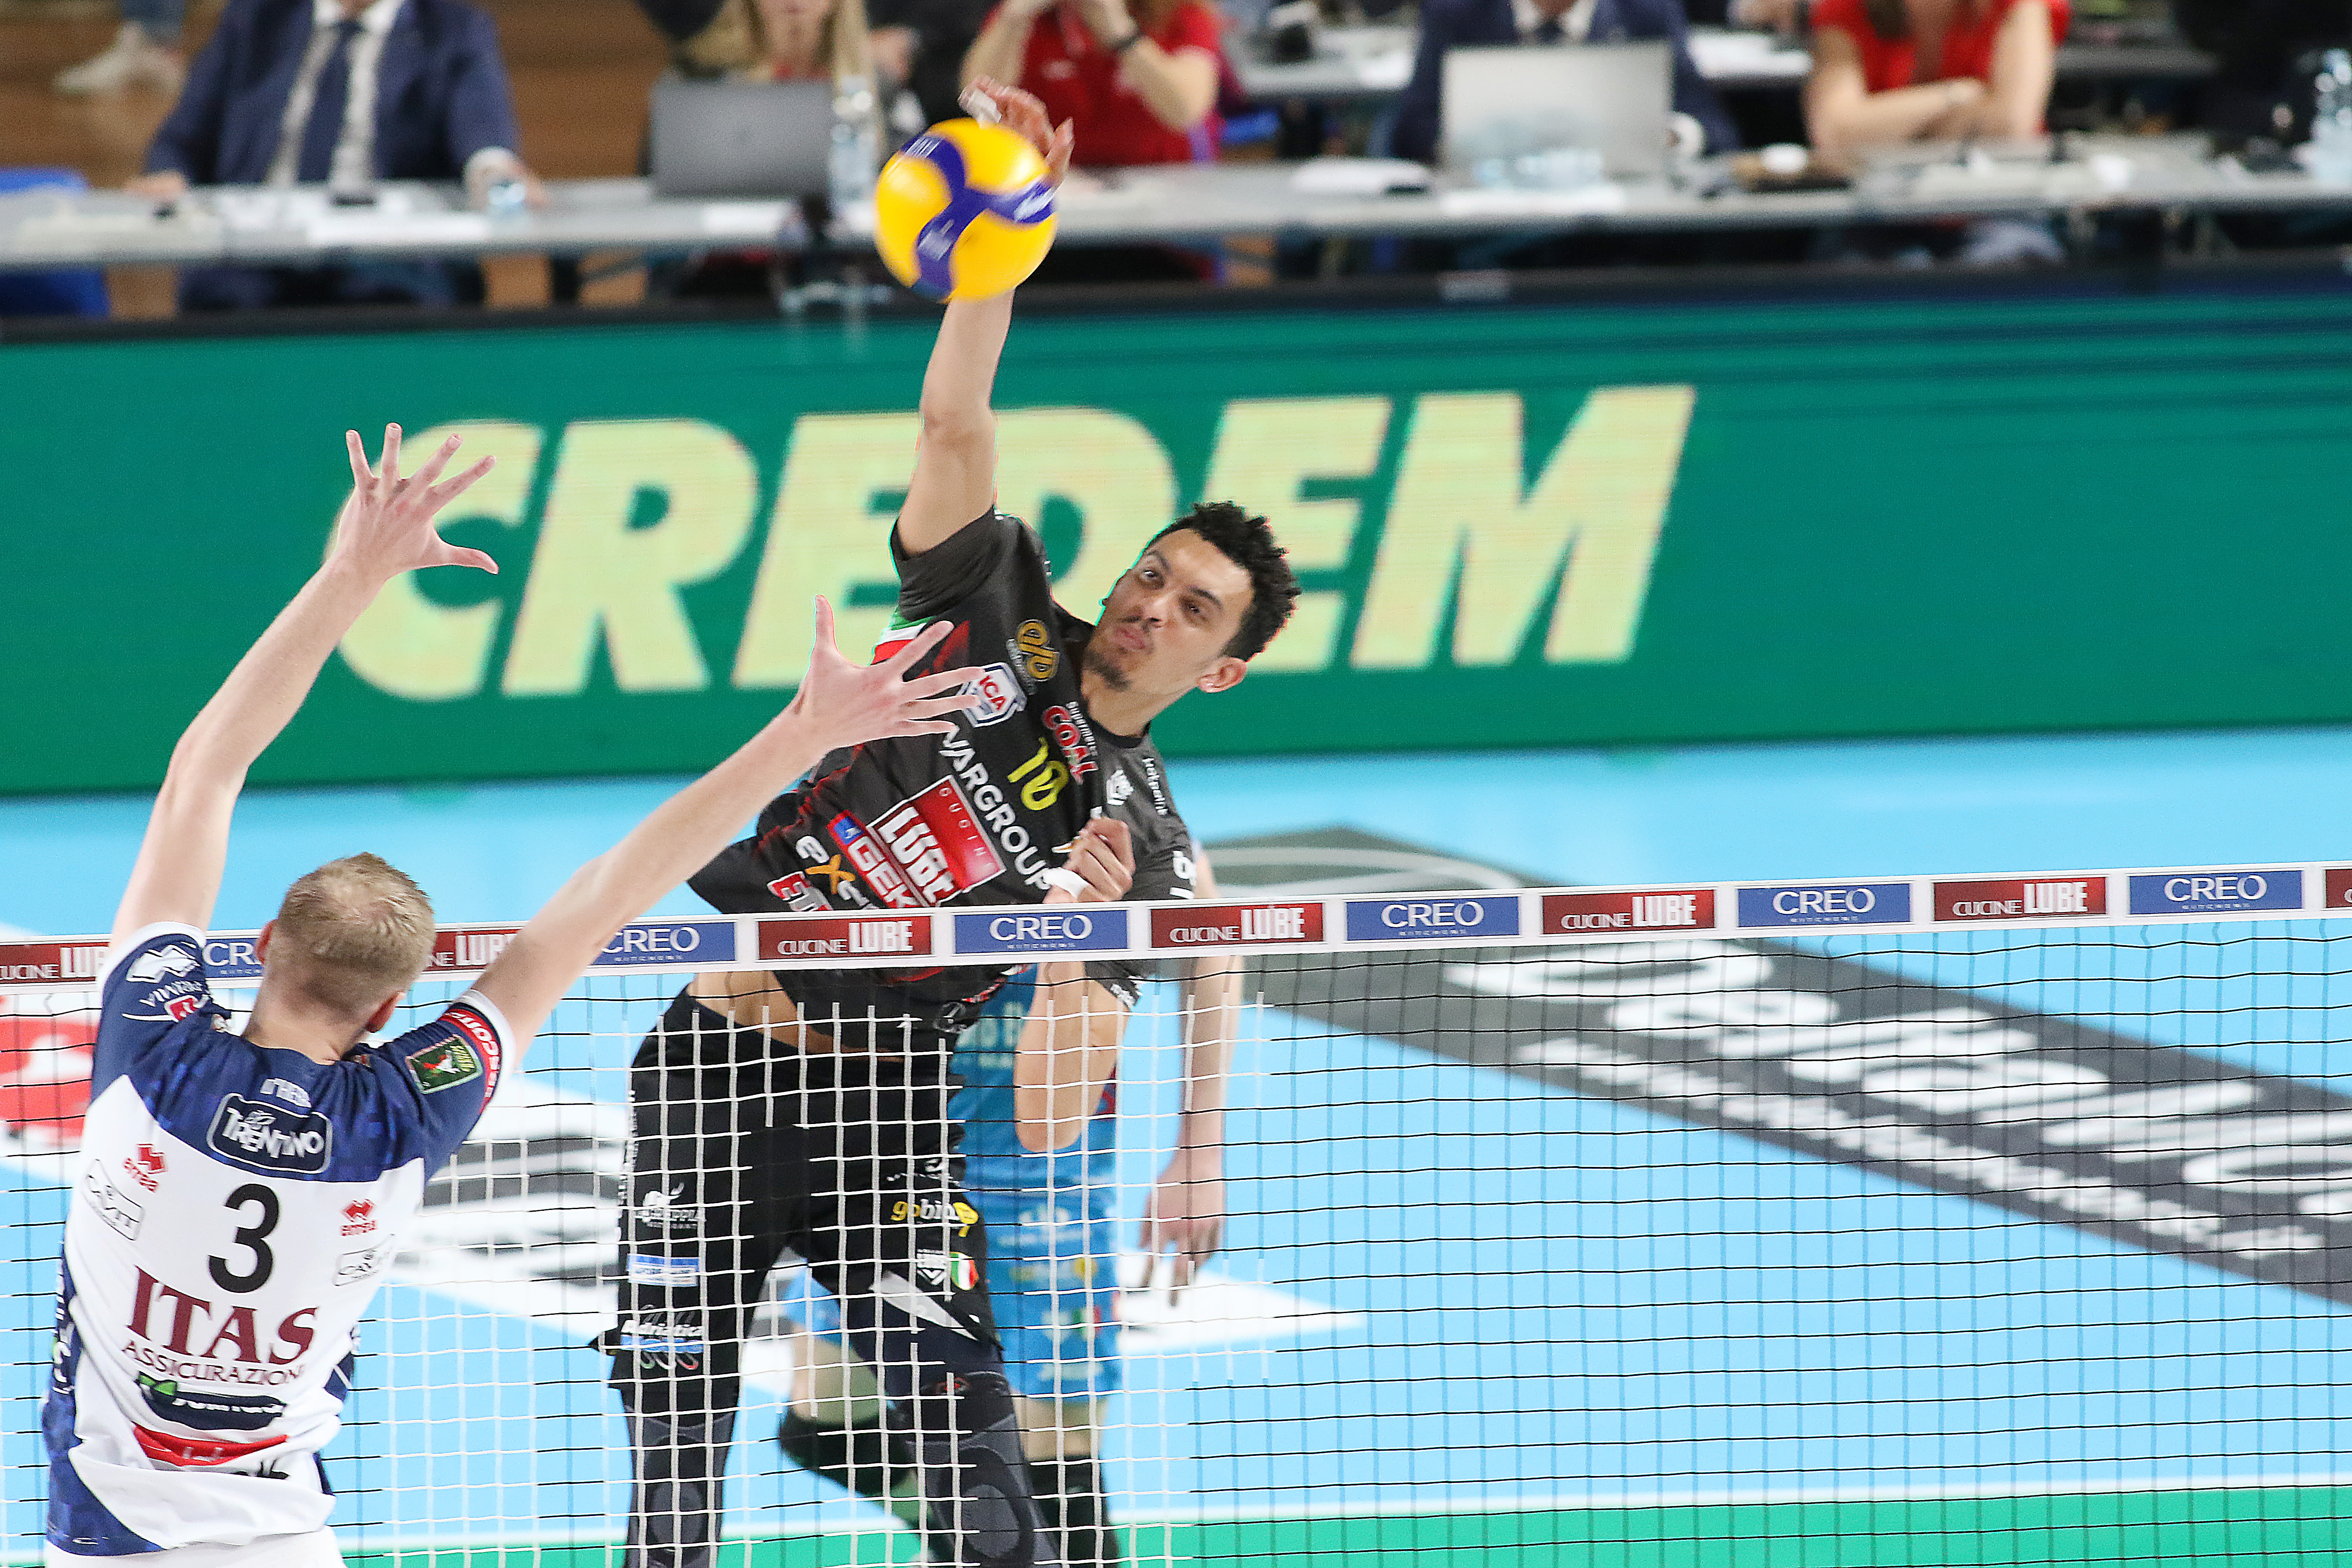 Chinenyeze steps up as Lube tie SuperLega Finals volleyballworld